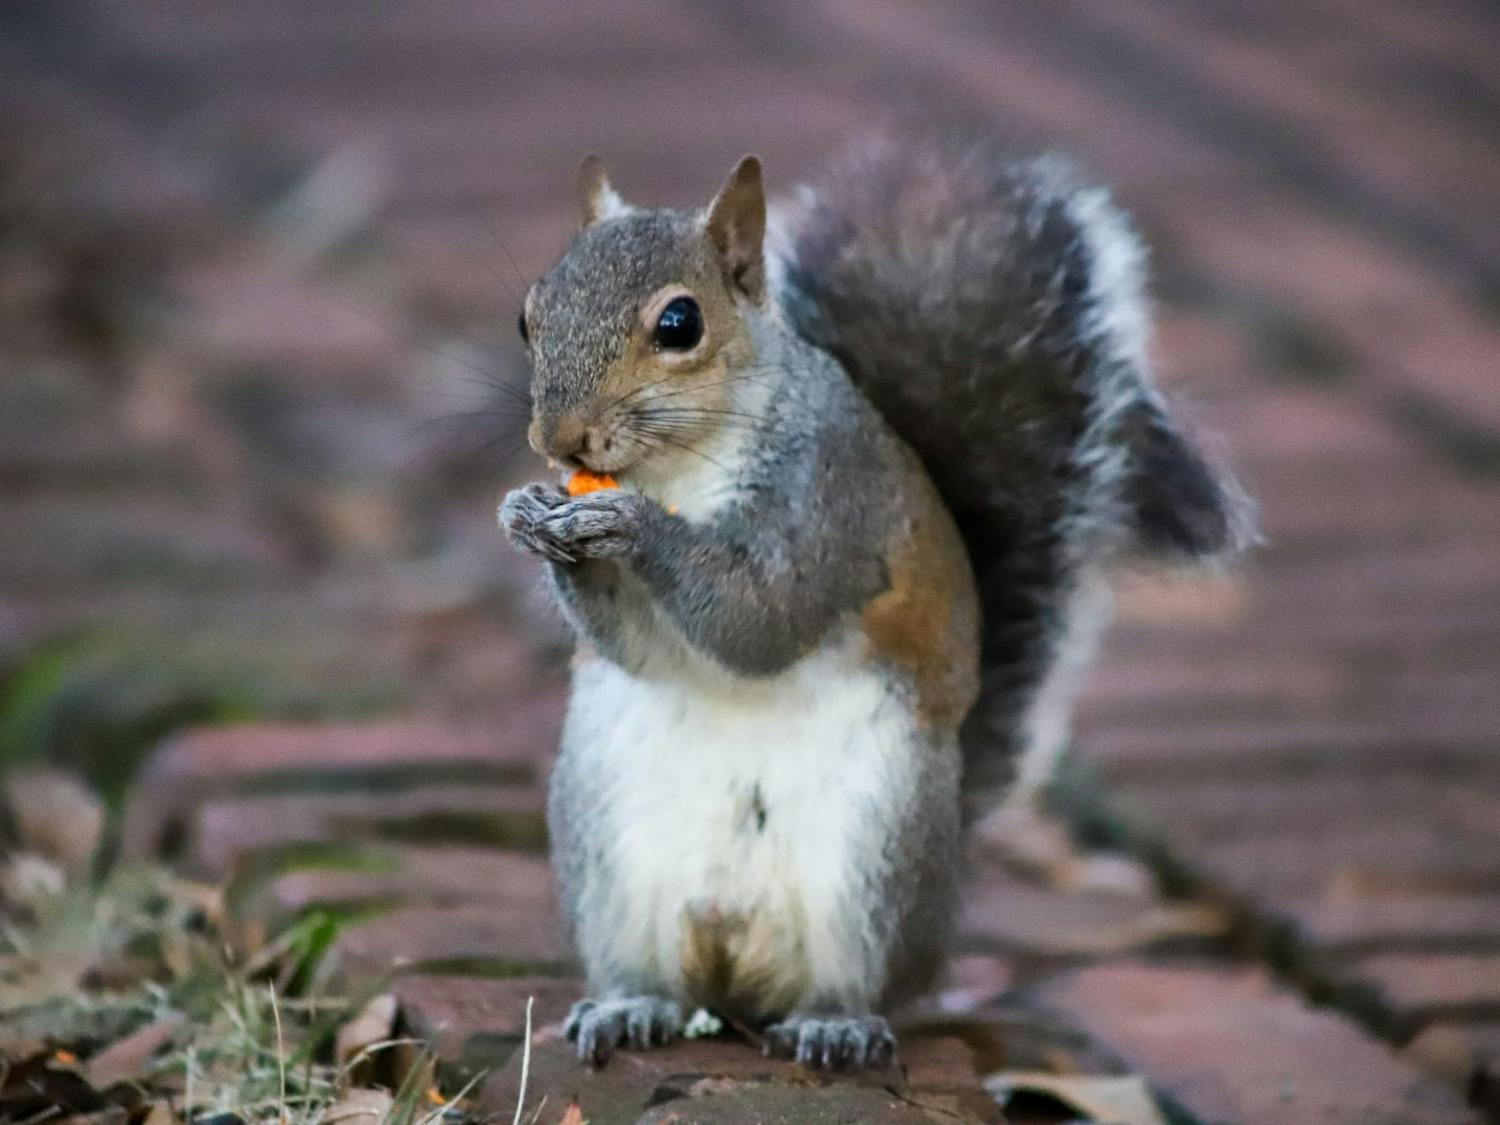 FILE - A squirrel eats on one of the various brick-lined paths on the Horseshoe in the center of the University of South Carolina Campus on Jan. 30, 2023. The Horseshoe is one of many places on campus where students can sit and observe members of the campus squirrel population.